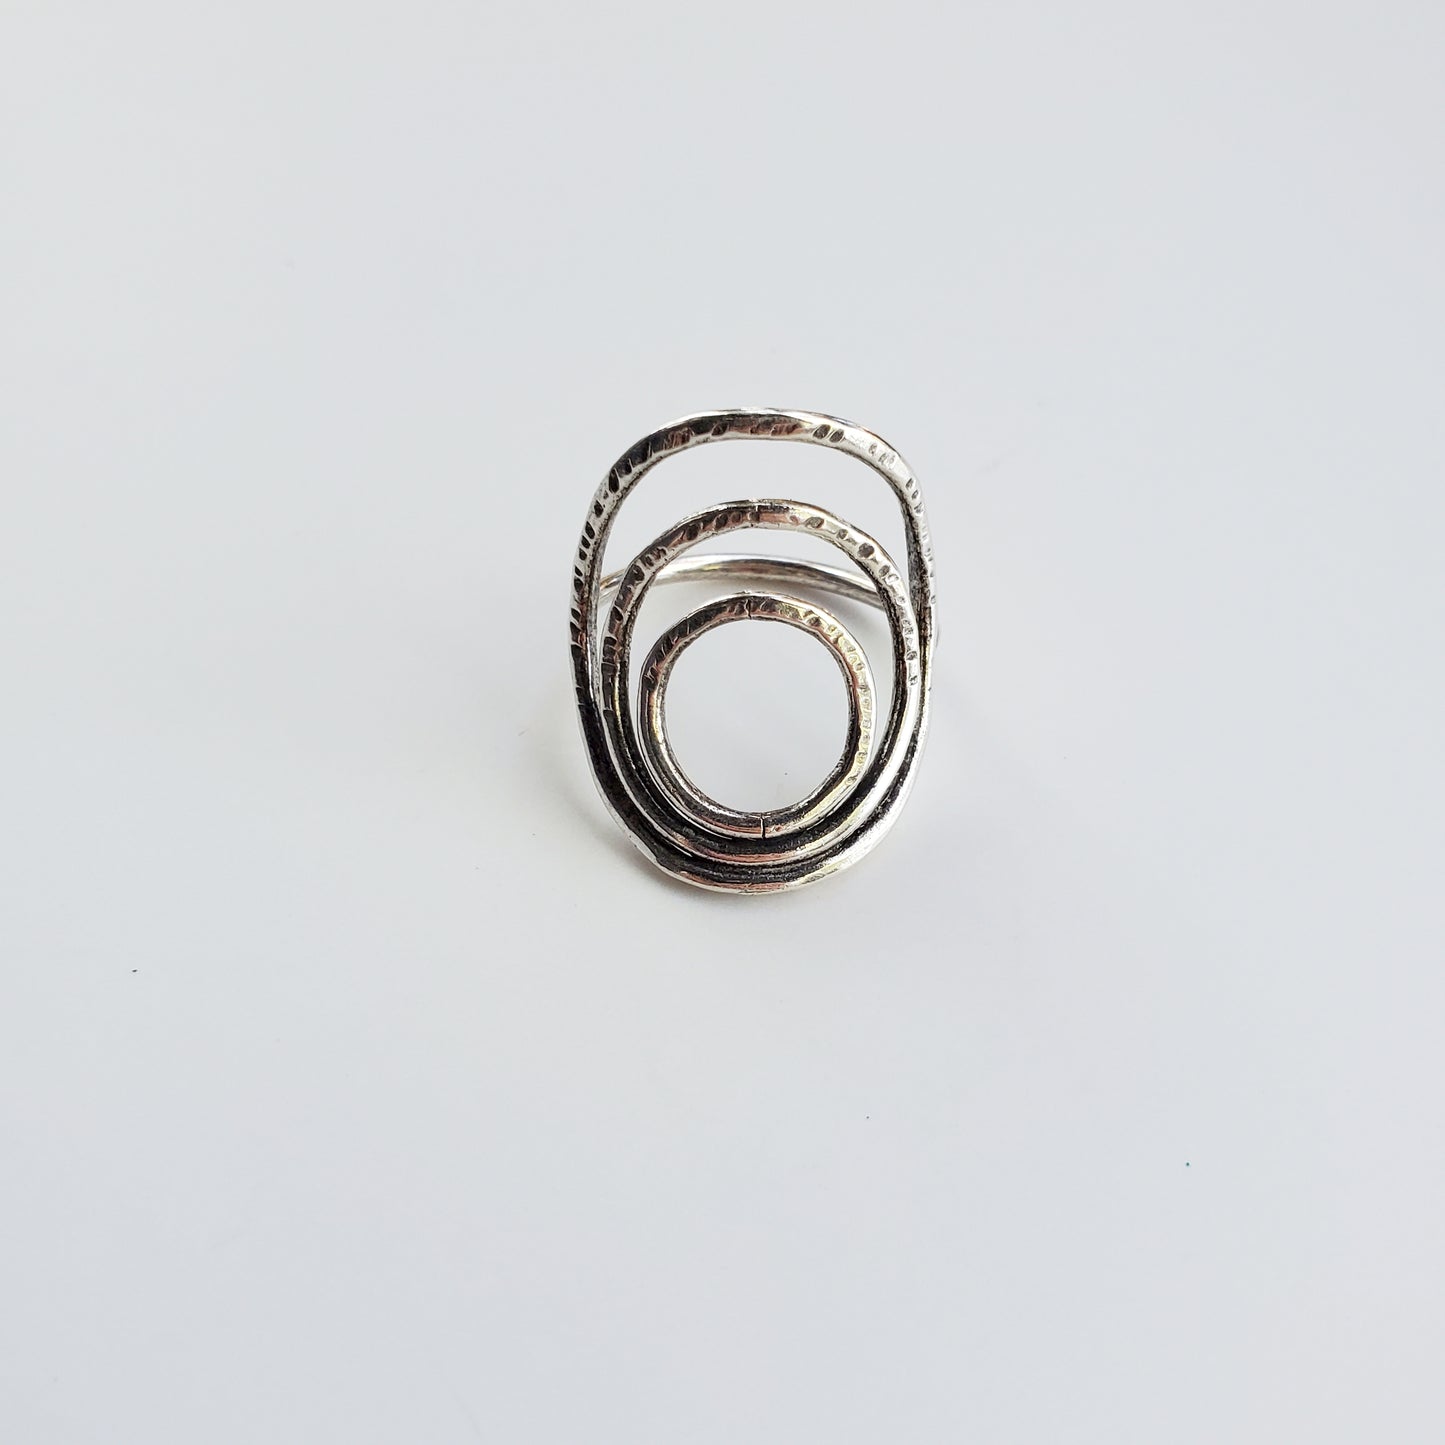 Connected Ring